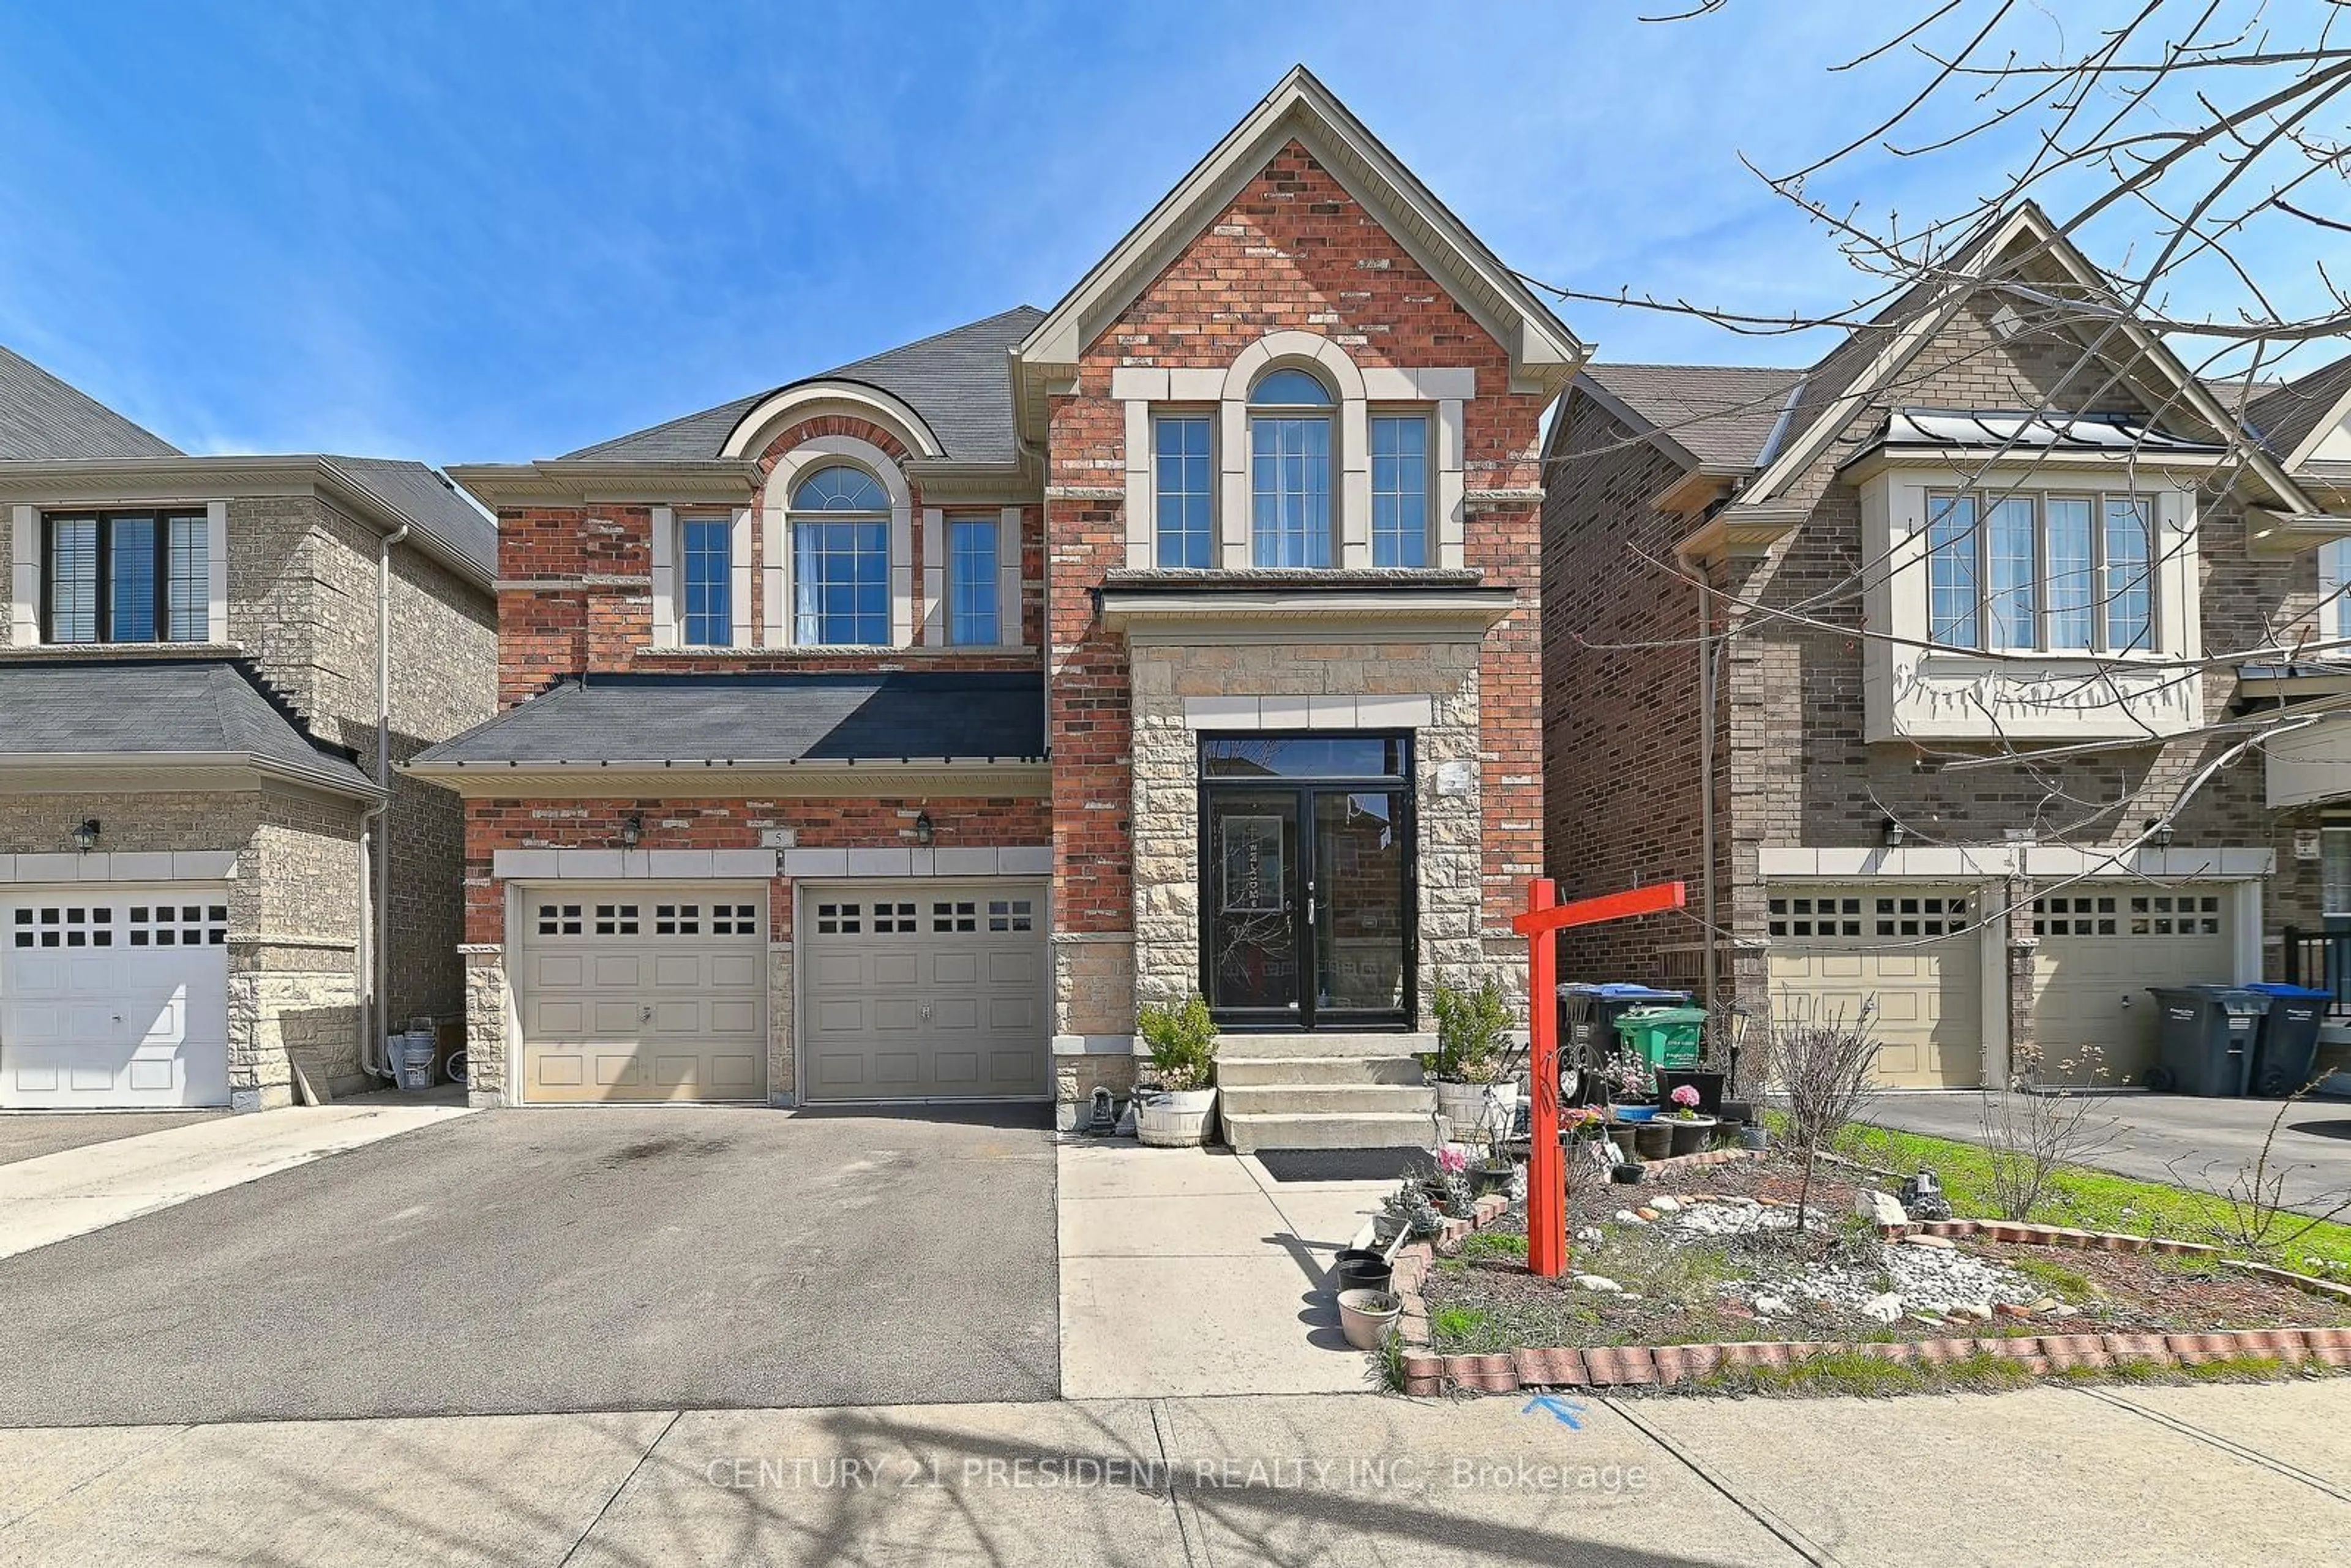 Home with brick exterior material for 5 Fringetree Rd, Brampton Ontario L6R 3V8